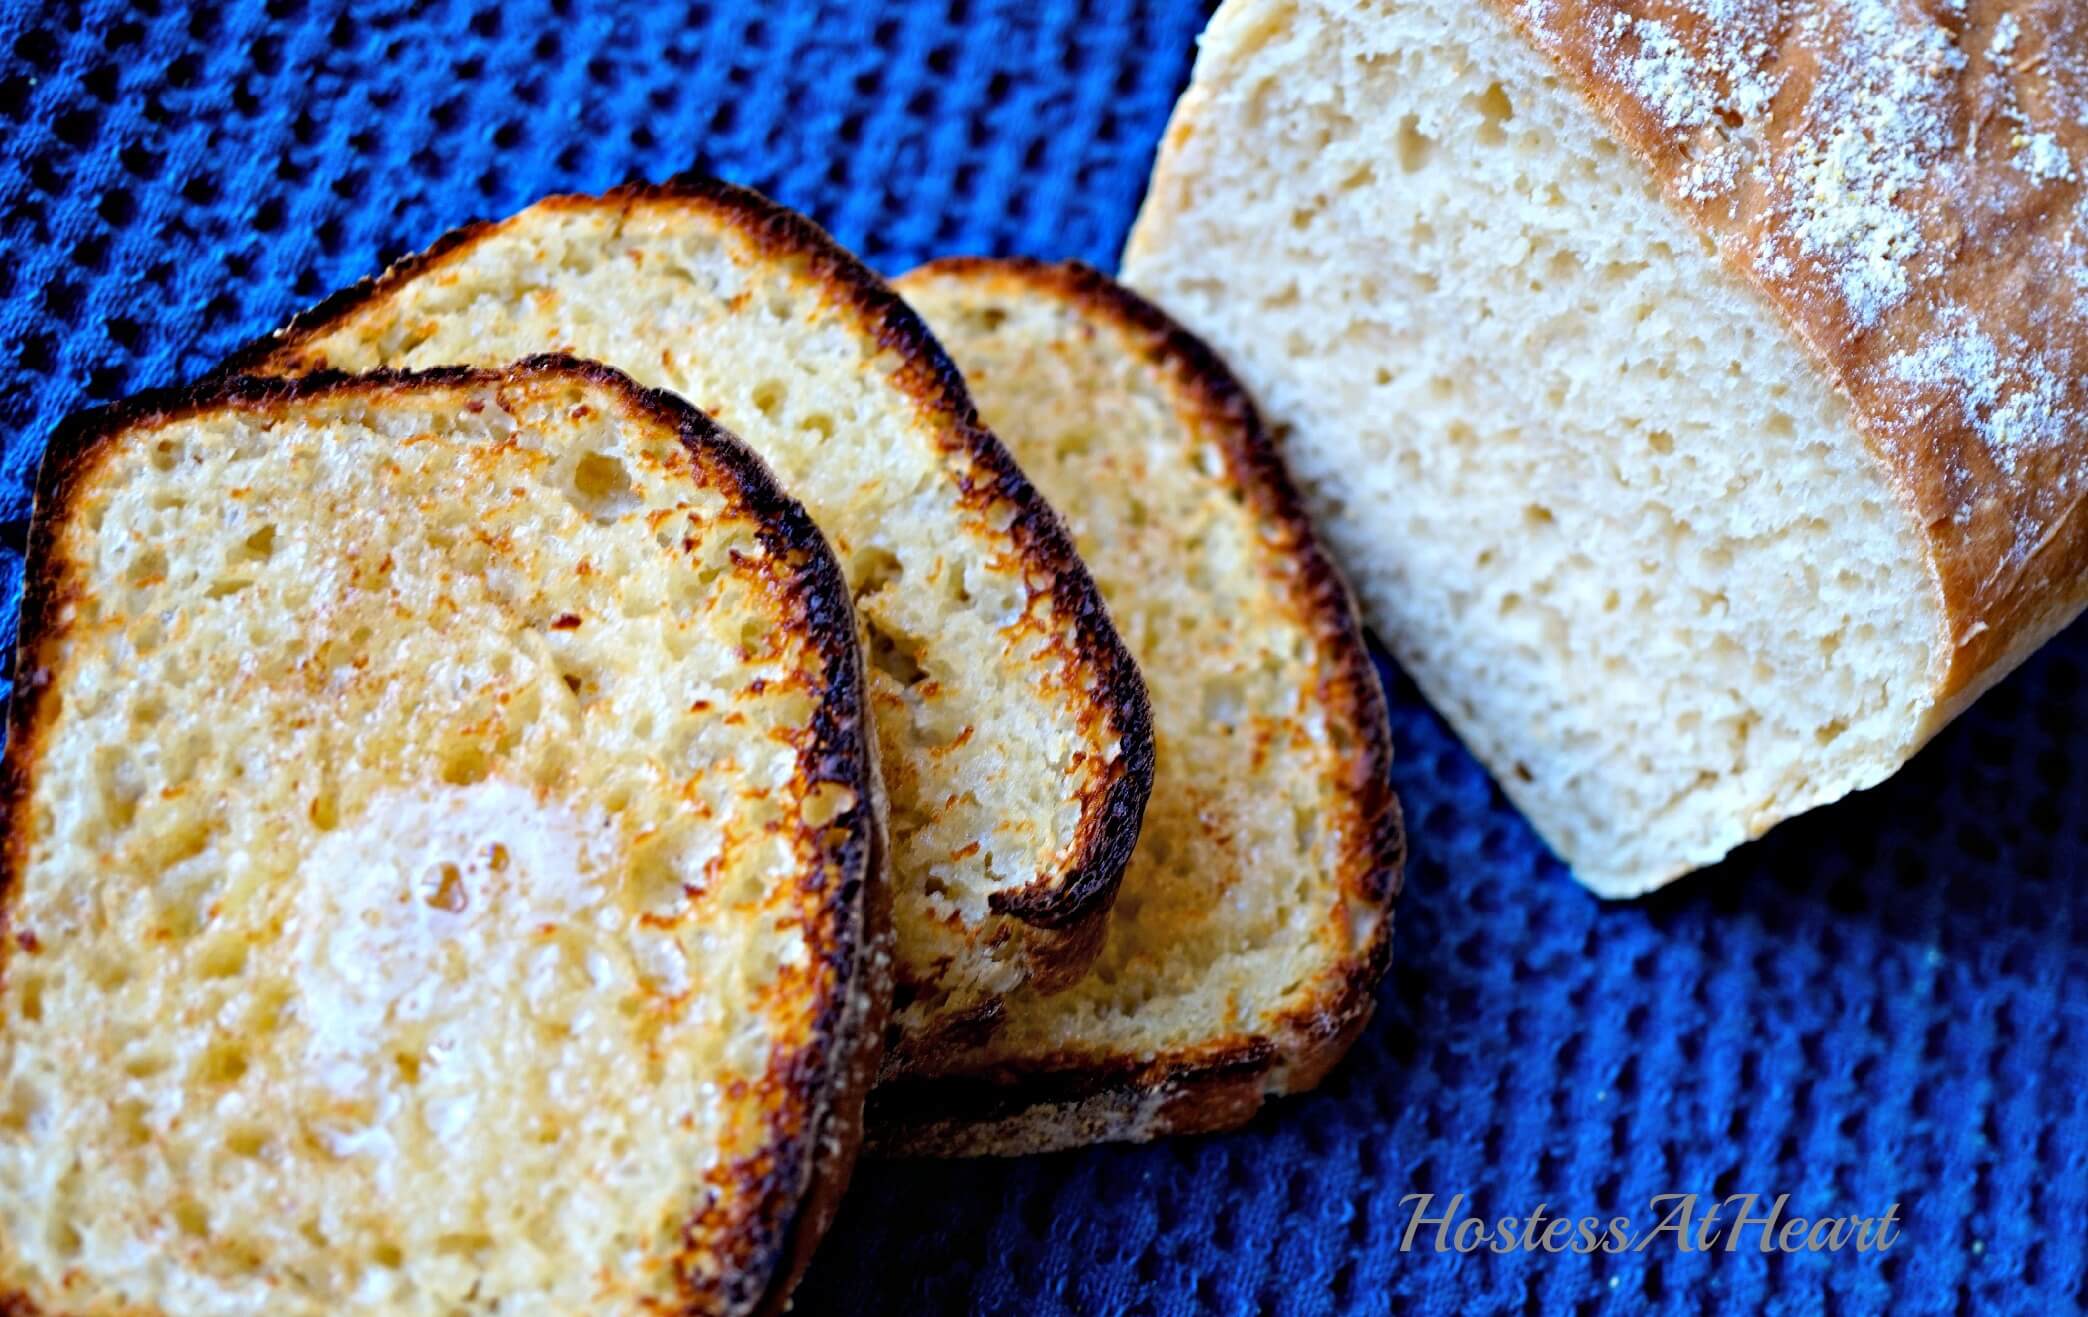 Slices of toasted English Muffin Bread sitting next to the cut loaf.